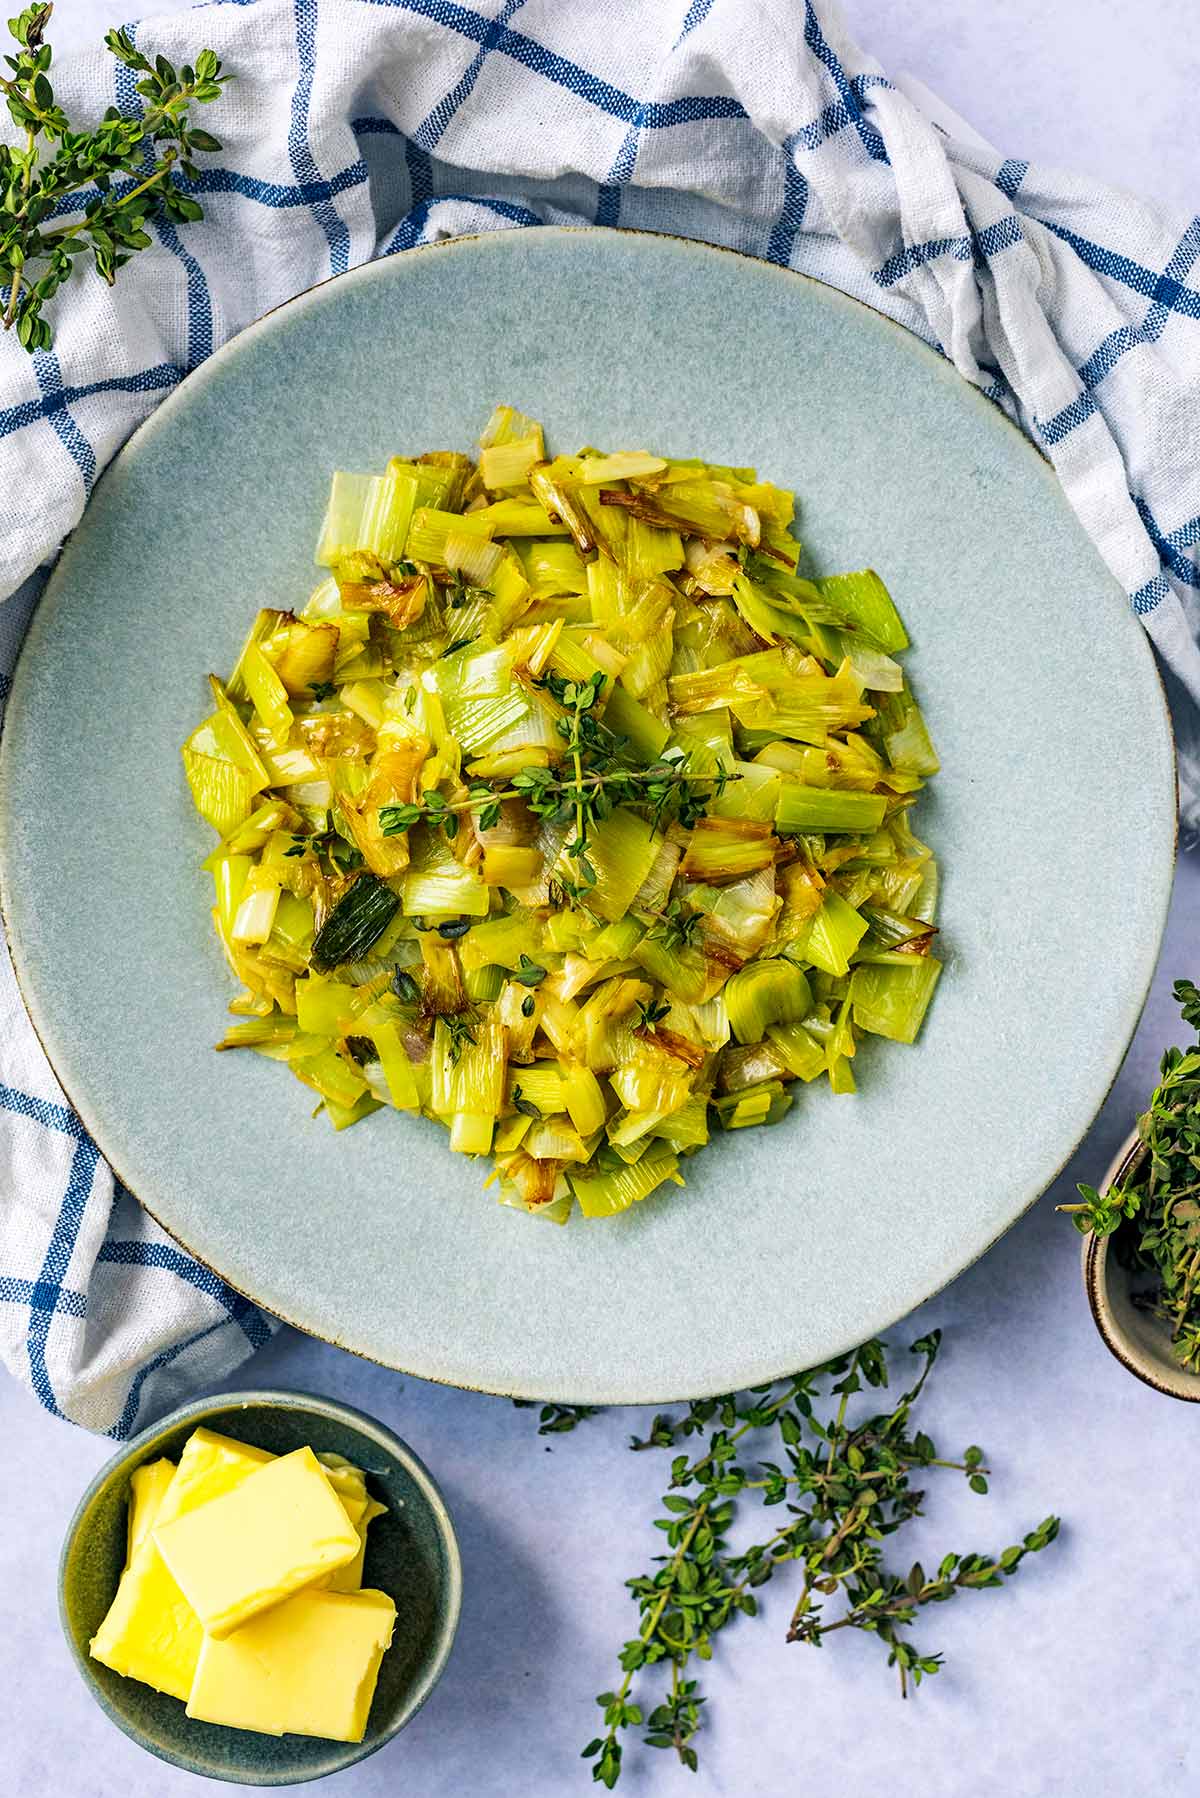 A plate of cooked leeks next to a bowl of butter and a bowl of fresh thyme sprigs.